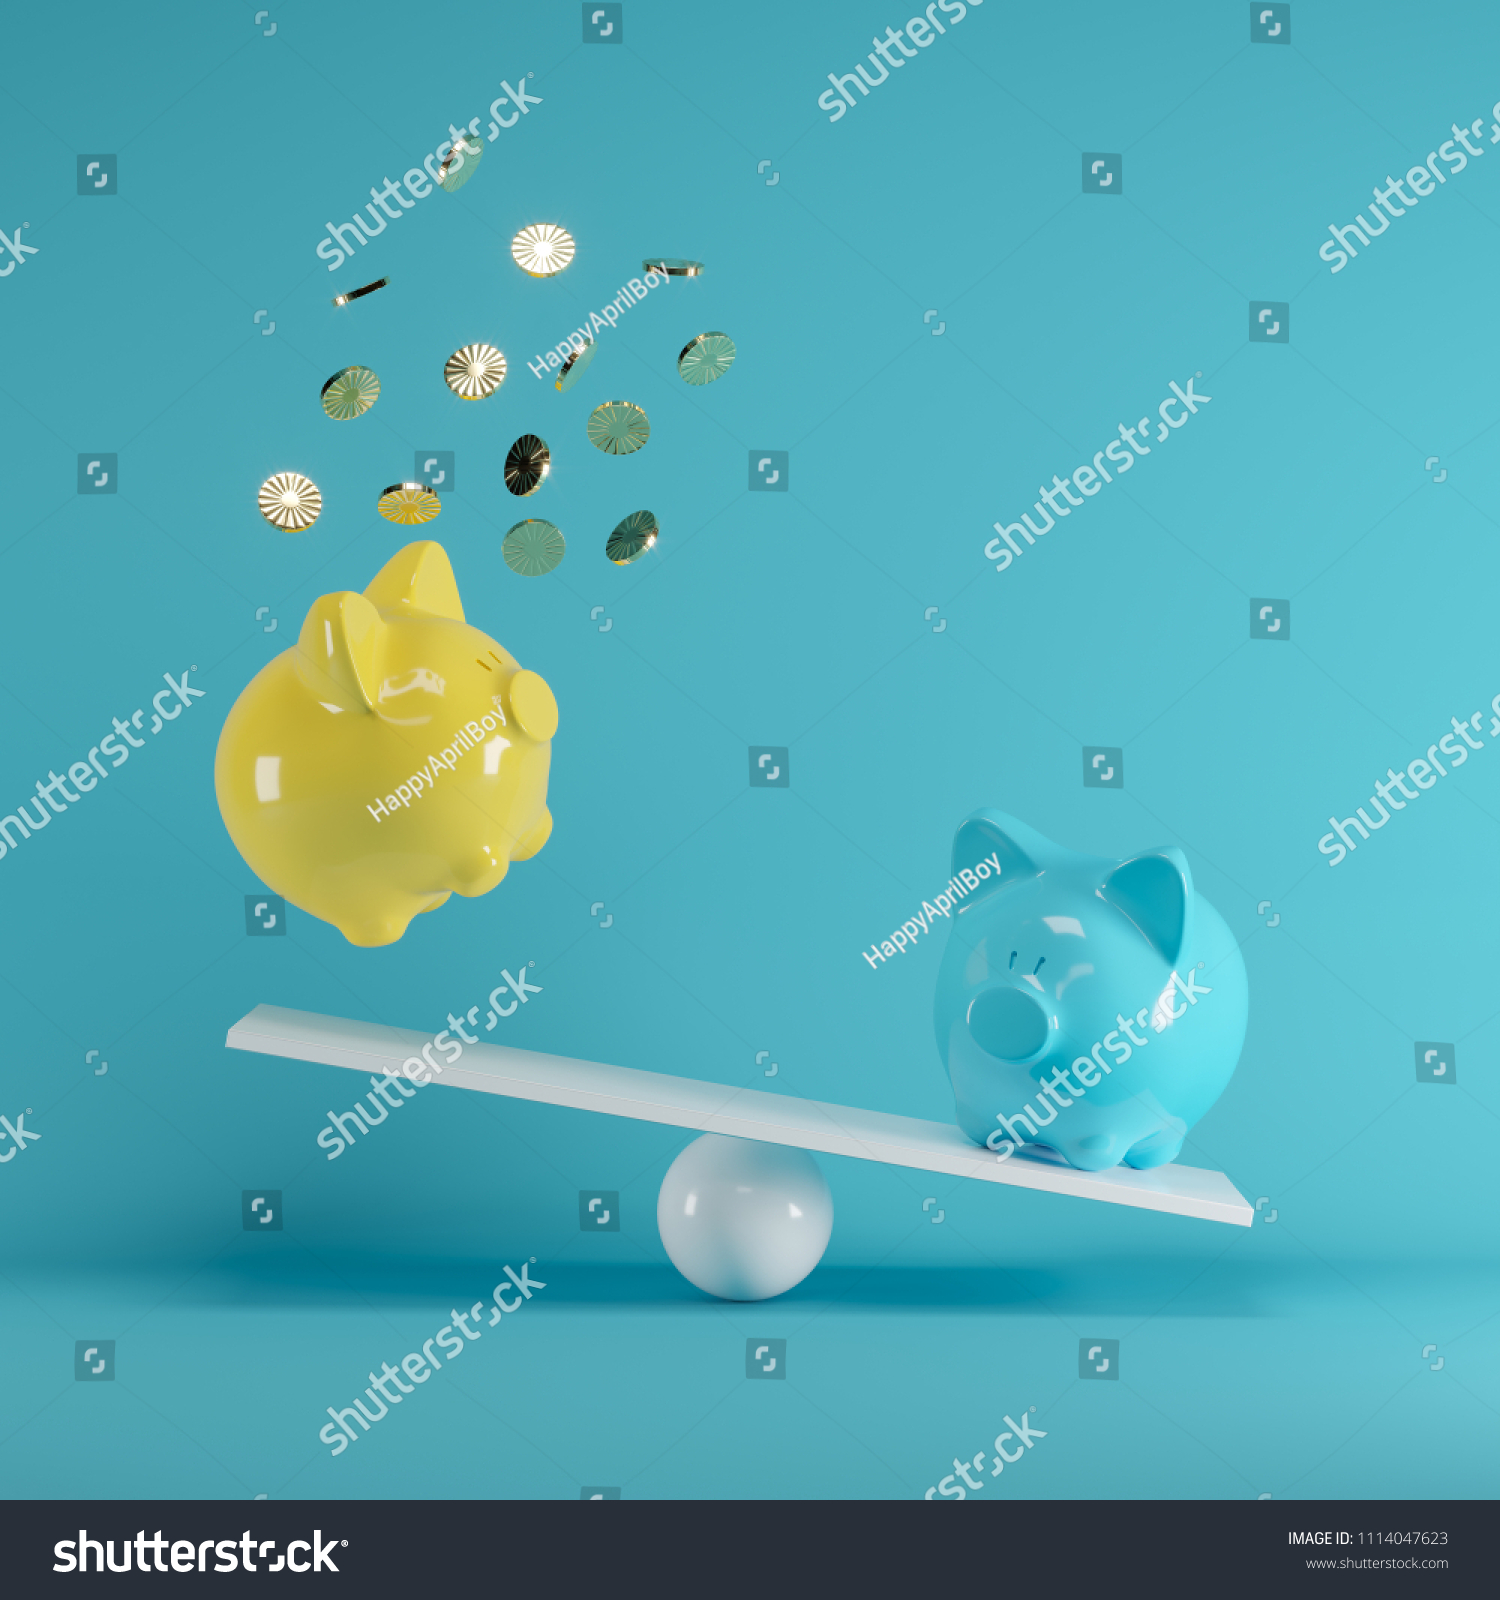 Blue and Yellow piggys bank playing with gold coin on seesaw on blue background. minimal idea funny concept. #1114047623